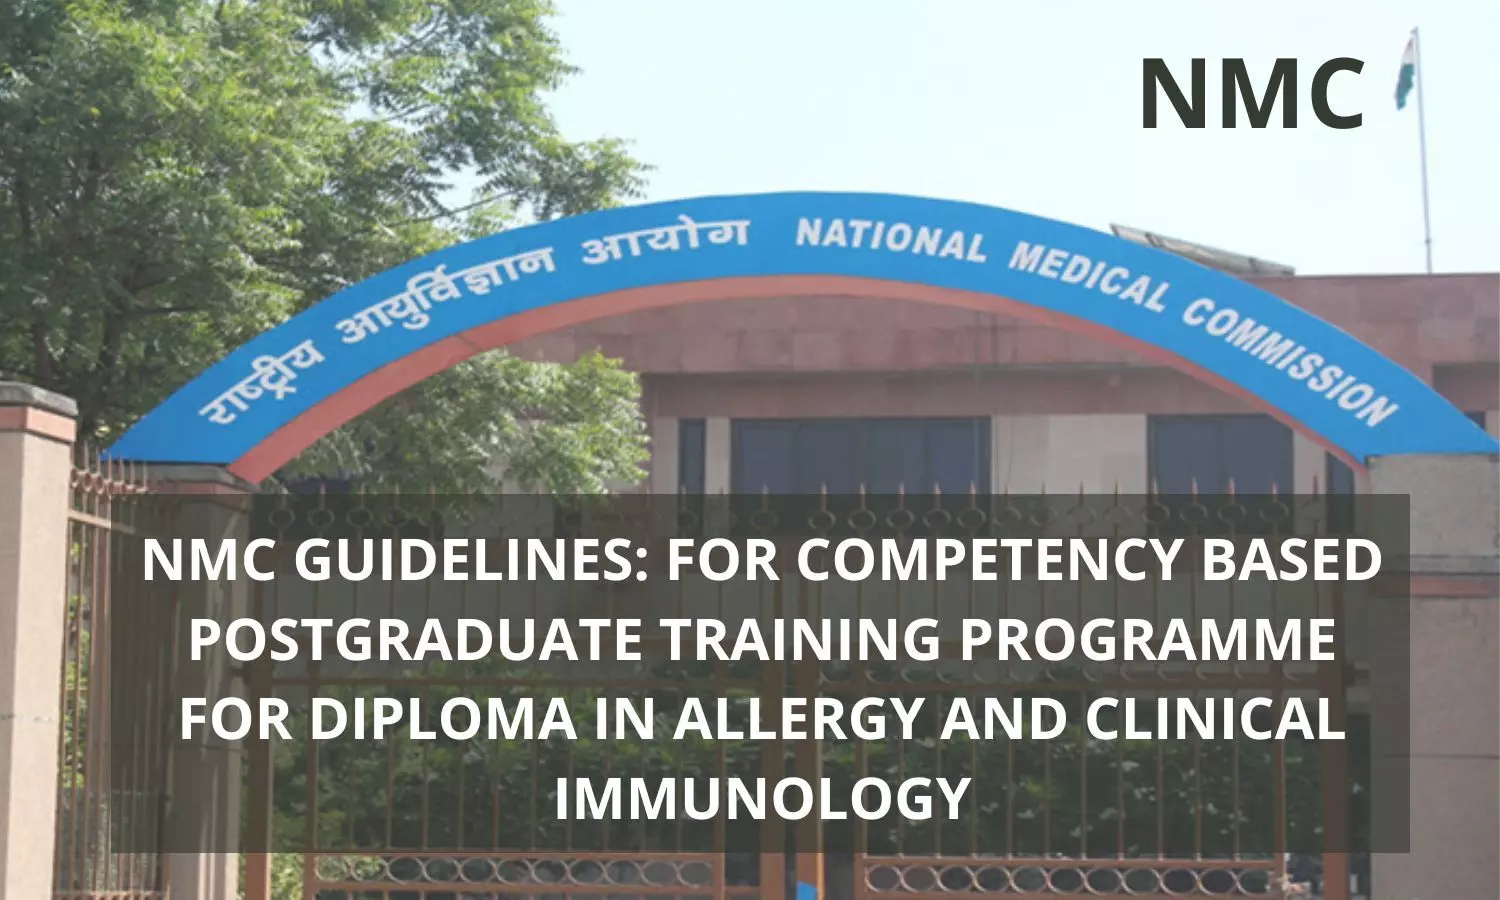 NMC Guidelines For Competency-Based Training Programme For PG Diploma Allergy And Clinical Immunology